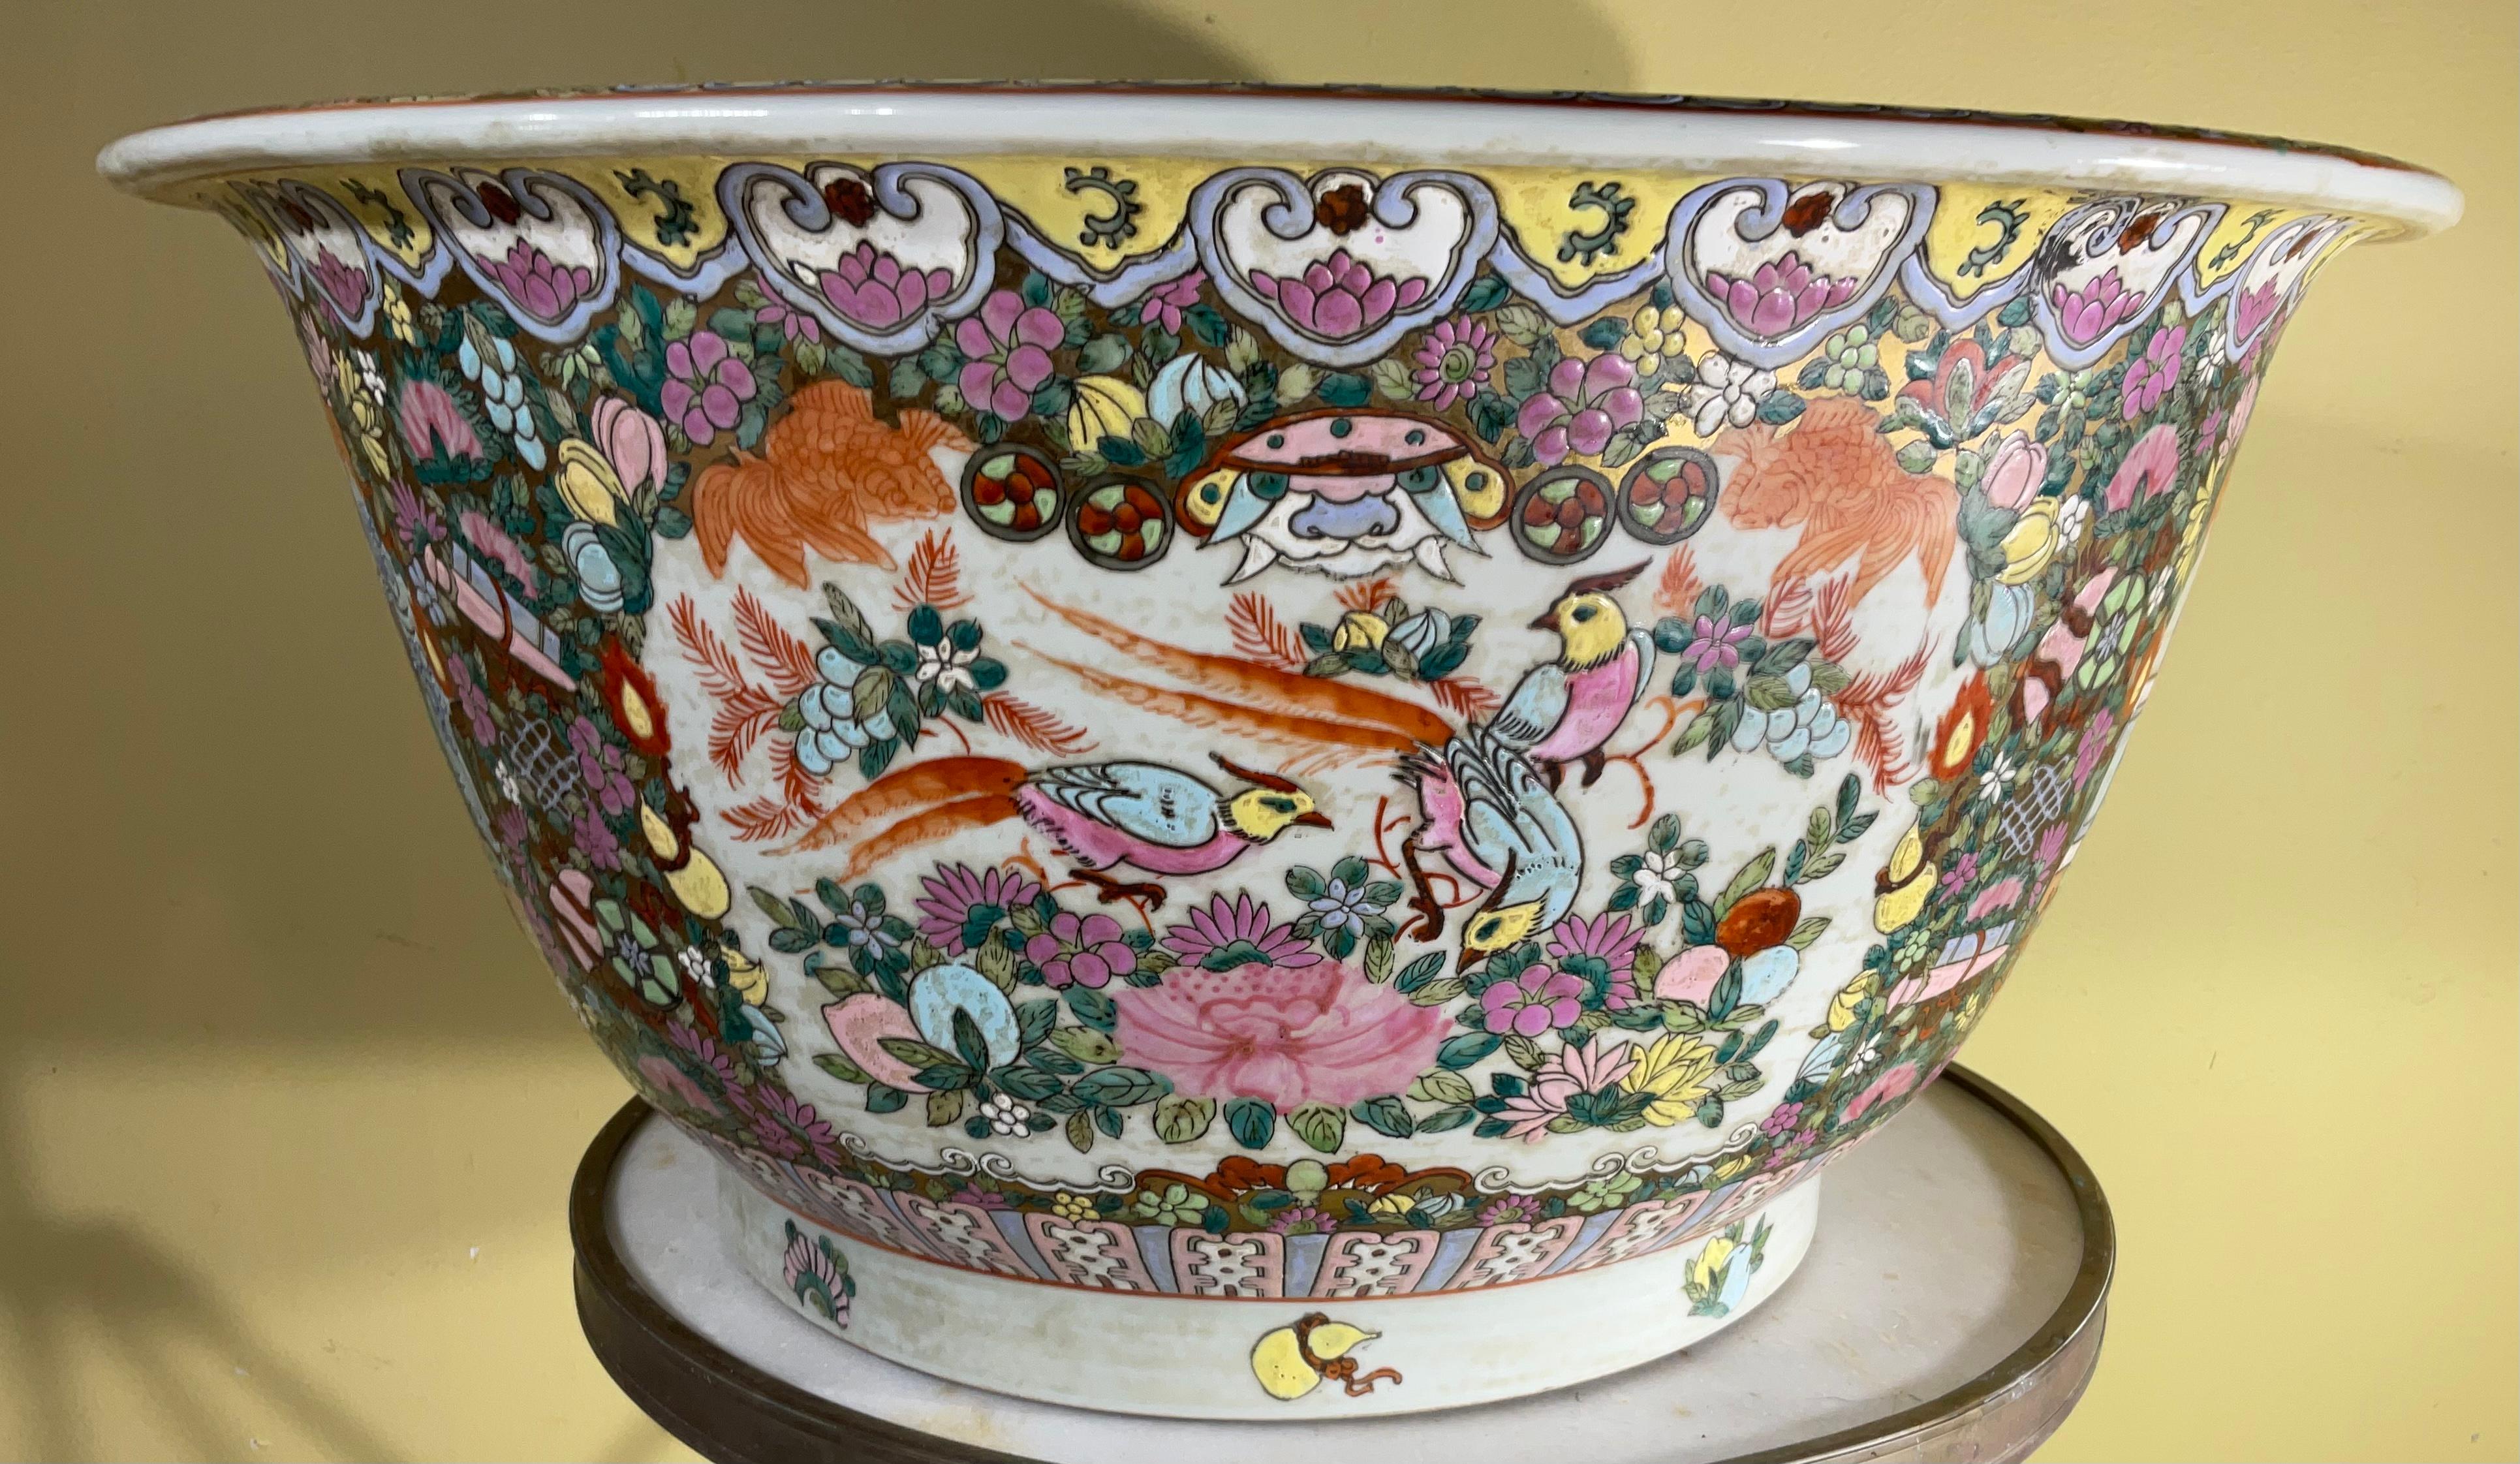 Large colorful vintage Chinese porcelain fishbowl. Features Classic, oriental scenes with Chinese family ,birds flowers and Chinese motifs throughout. It is painted inside too could use as center piece ,planter or decoration.
Beautiful object of